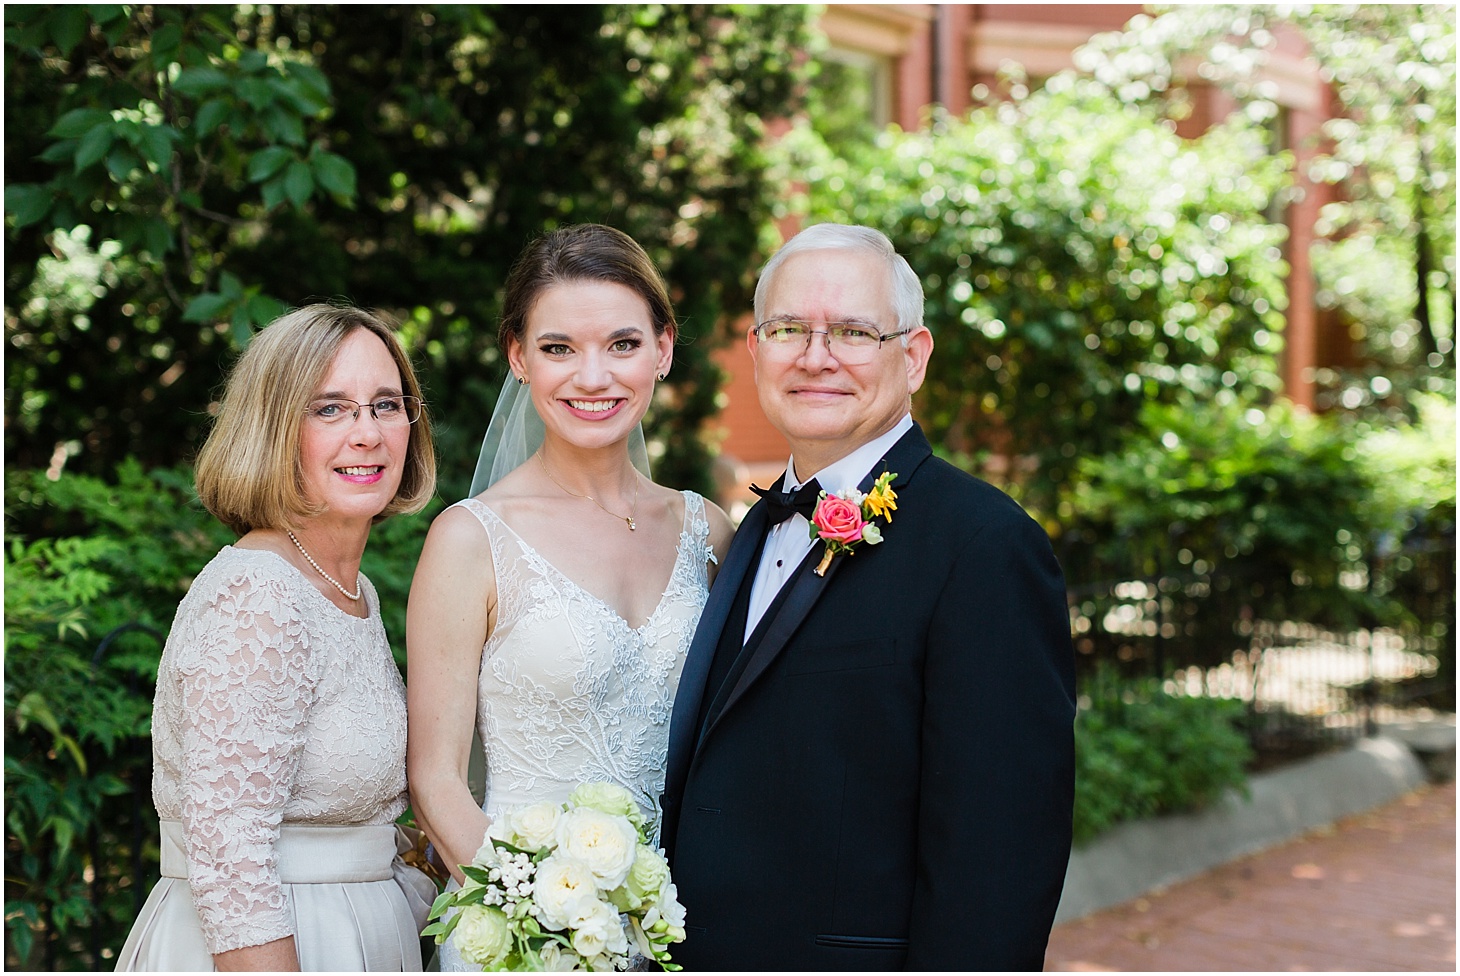 Bride with Parents before Ceremony, Black Tie Hay-Adams Wedding with Summer Florals, Ceremony at Capitol Hill Baptist Church, Sarah Bradshaw Photography, DC Wedding Photographer